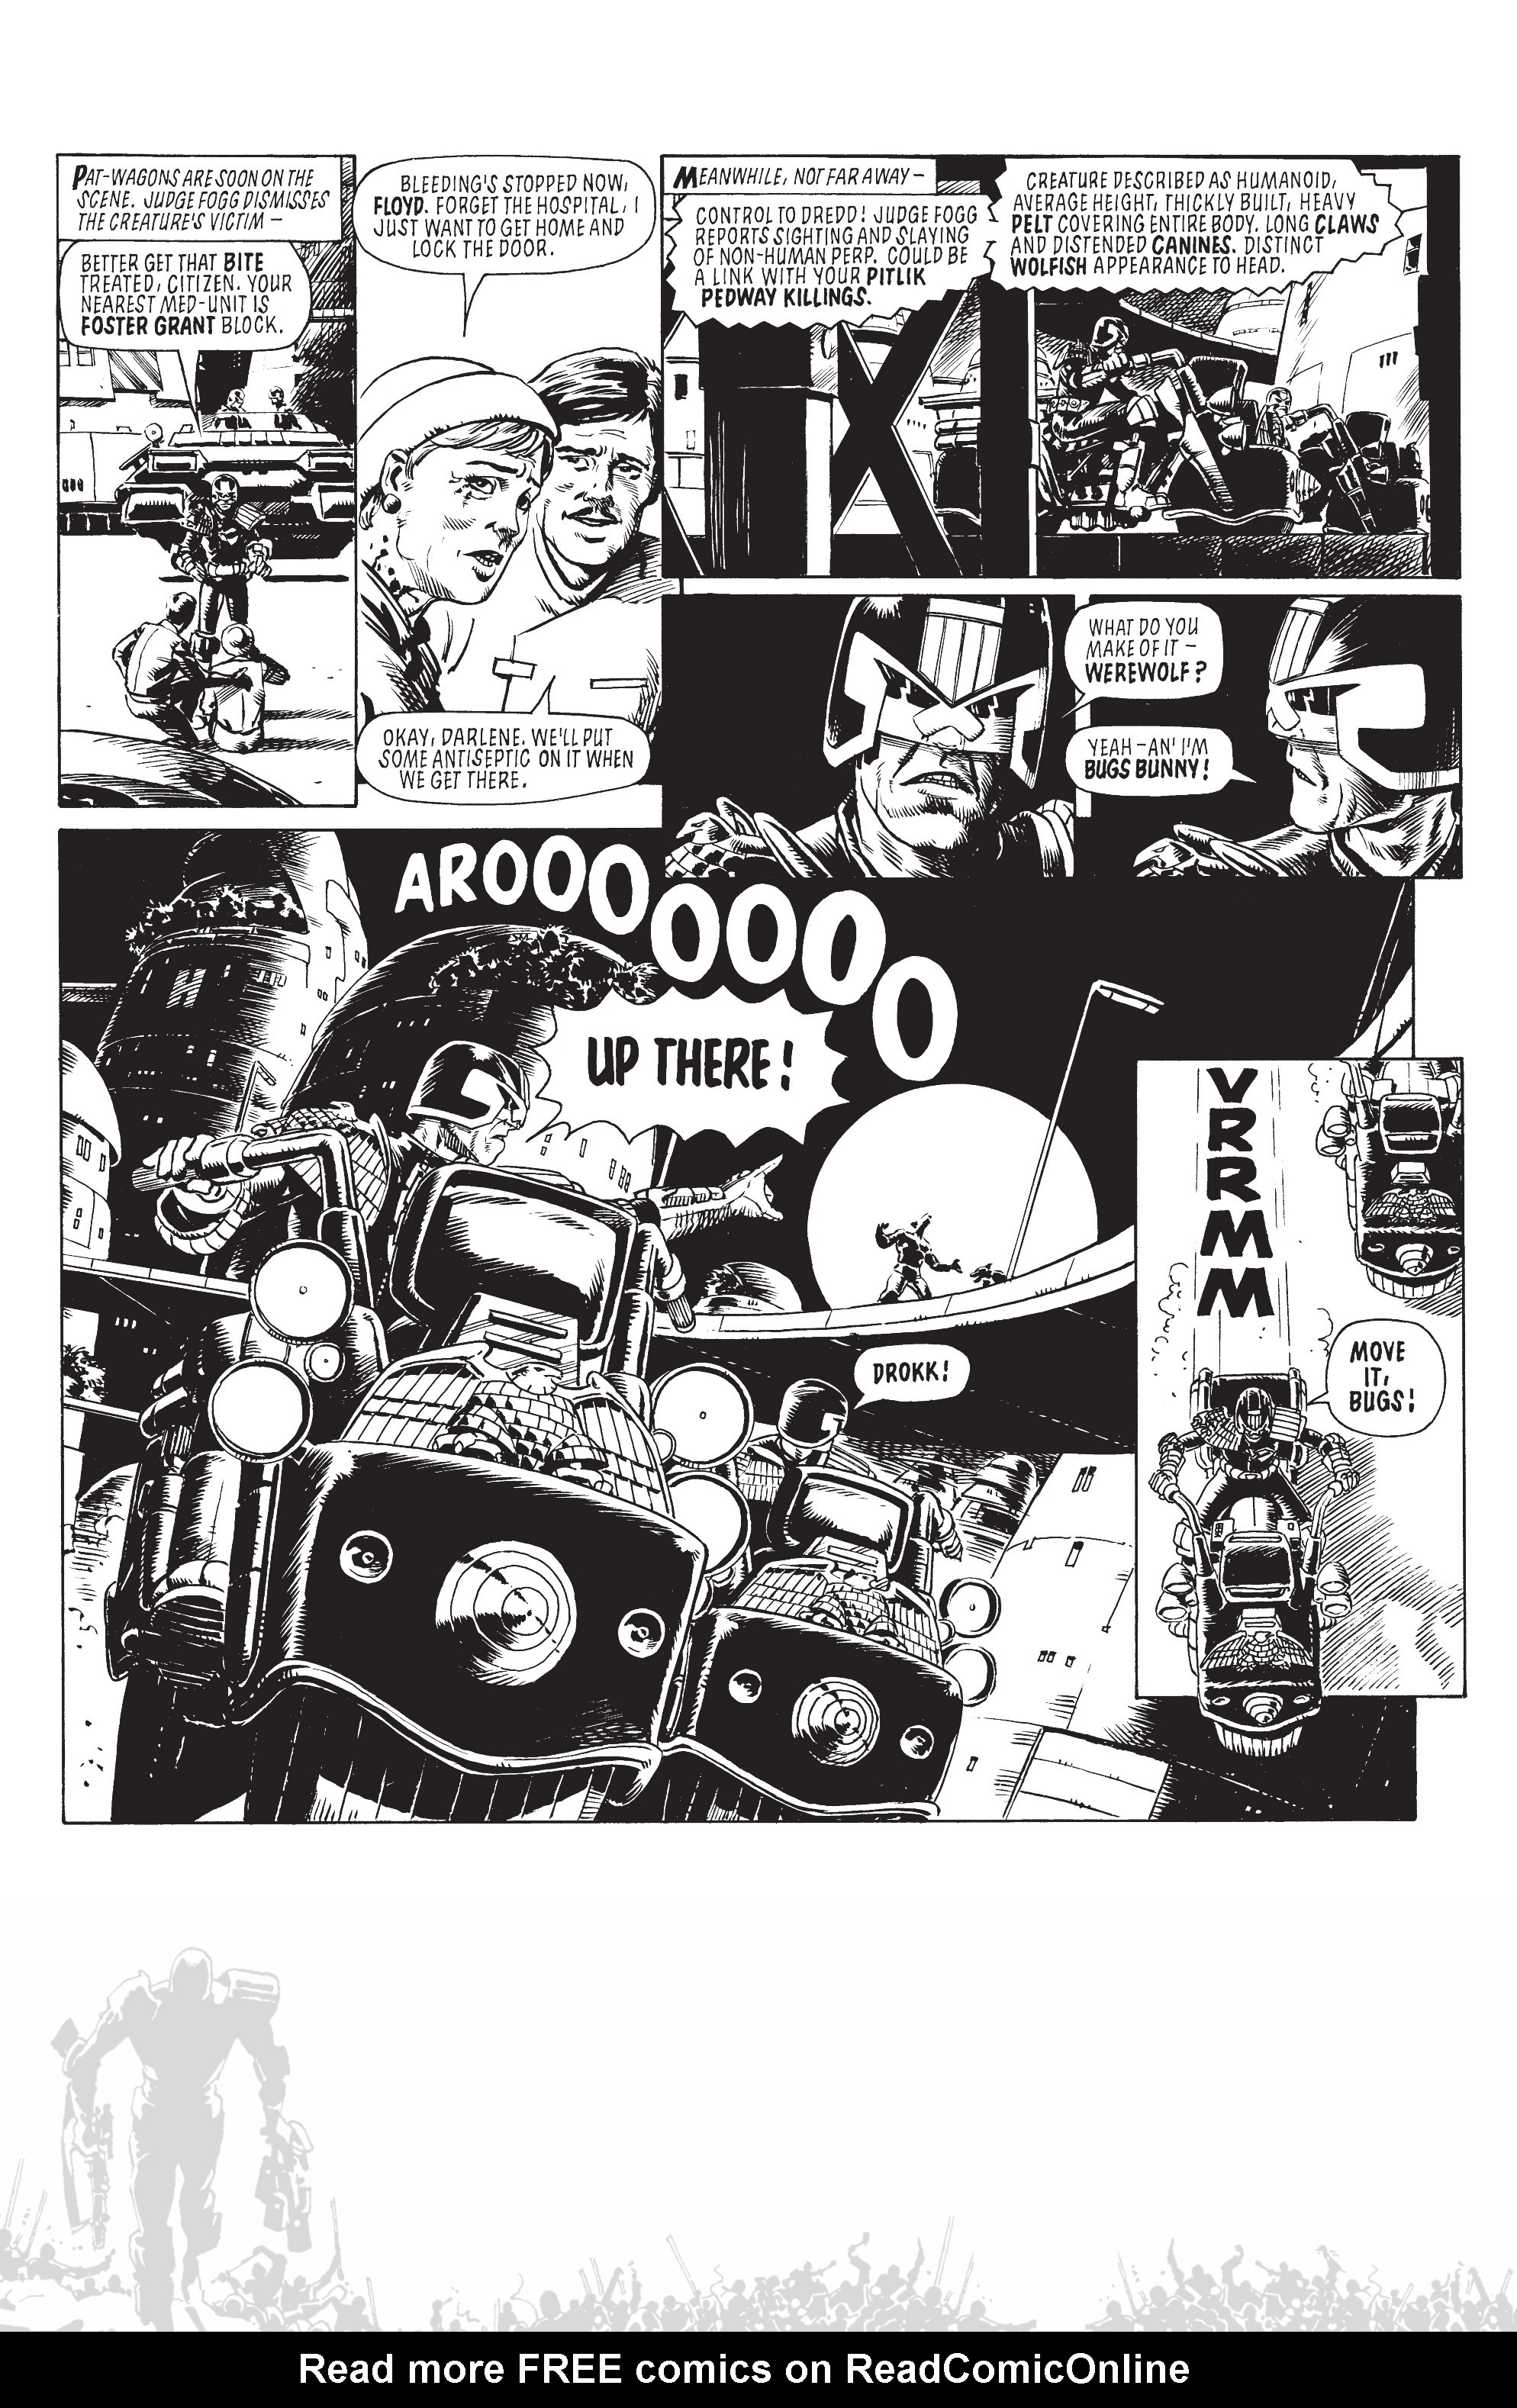 Read online Judge Dredd: Cry of the Werewolf comic -  Issue # Full - 10